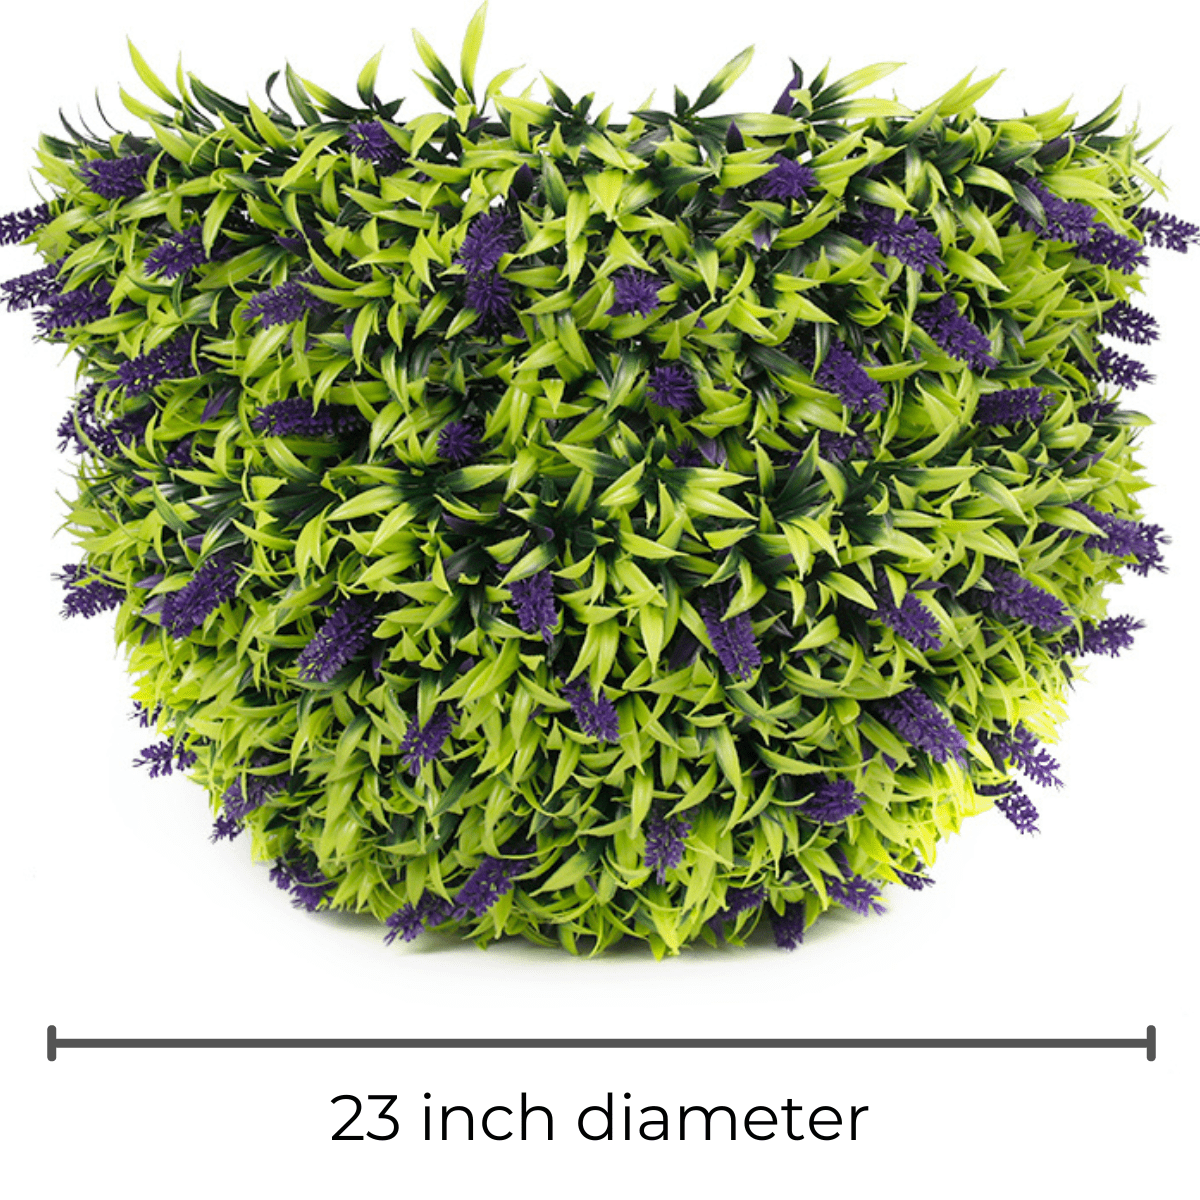 365 Curb Appeal Topiary ball 23" XL Grass Lilac Topiary Ball